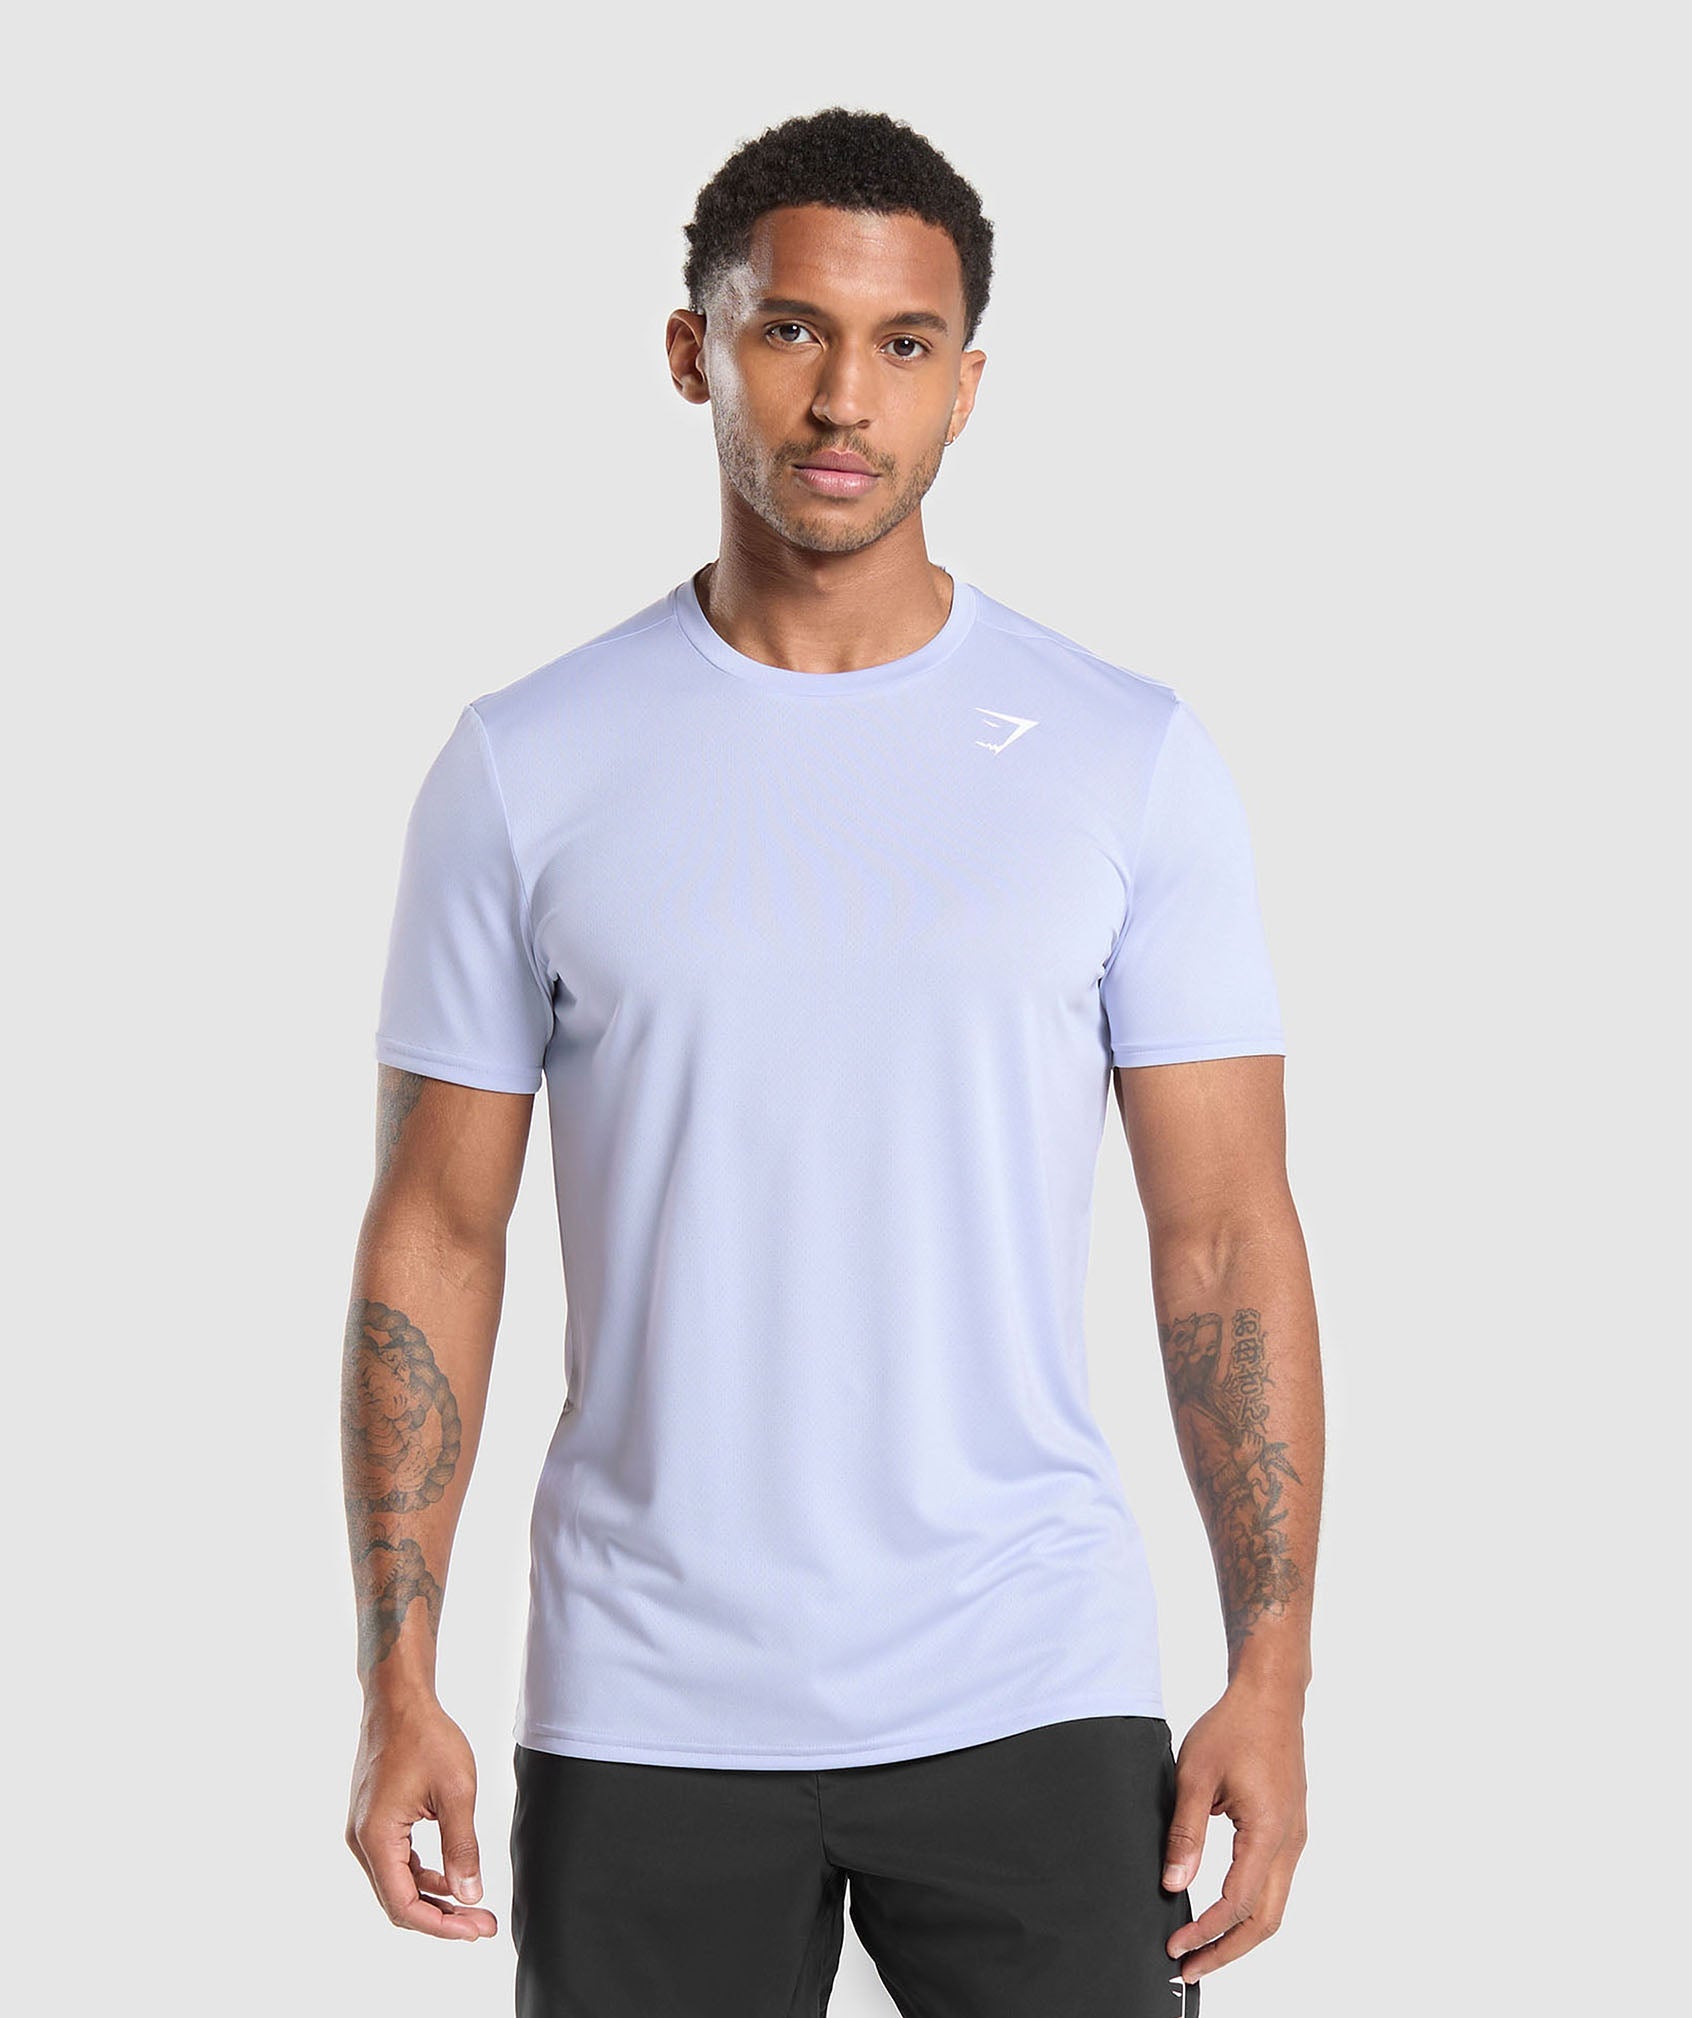 Arrival T-Shirt in Silver Lilac - view 1